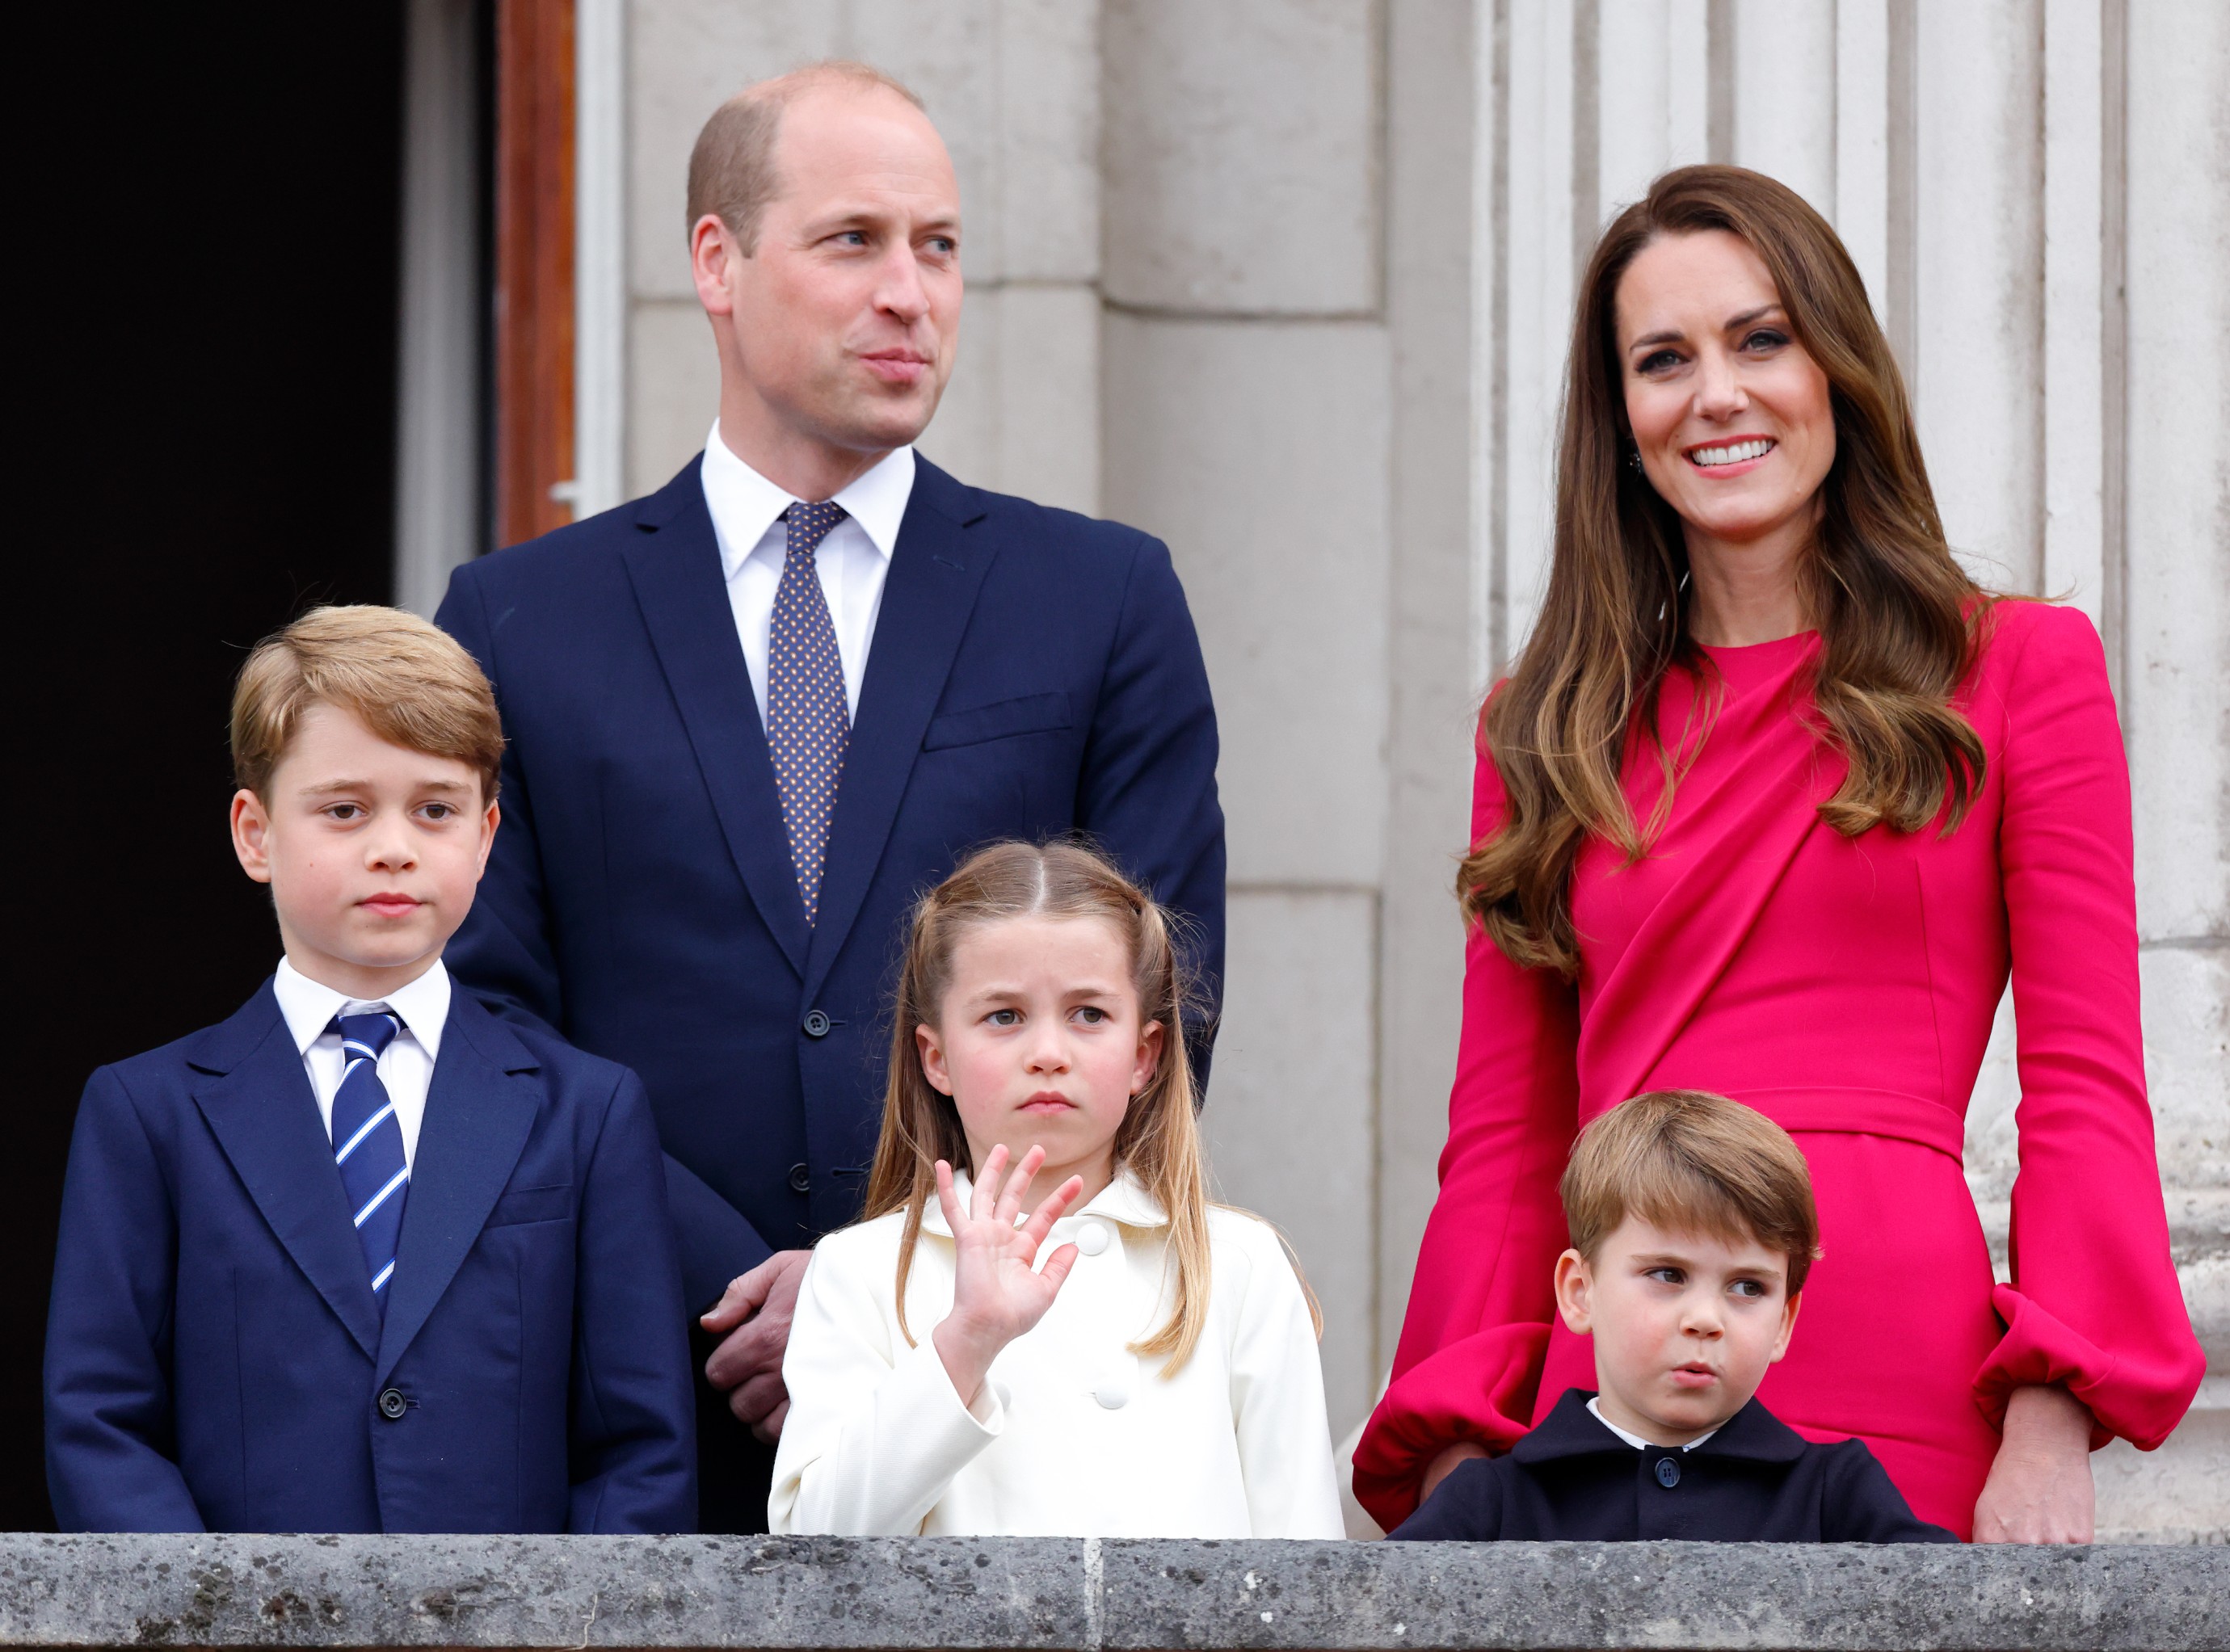 Prince William, Kate Middleton and their children Prince George, Princess Charlotte, and Prince Louis (Image: Getty Images)